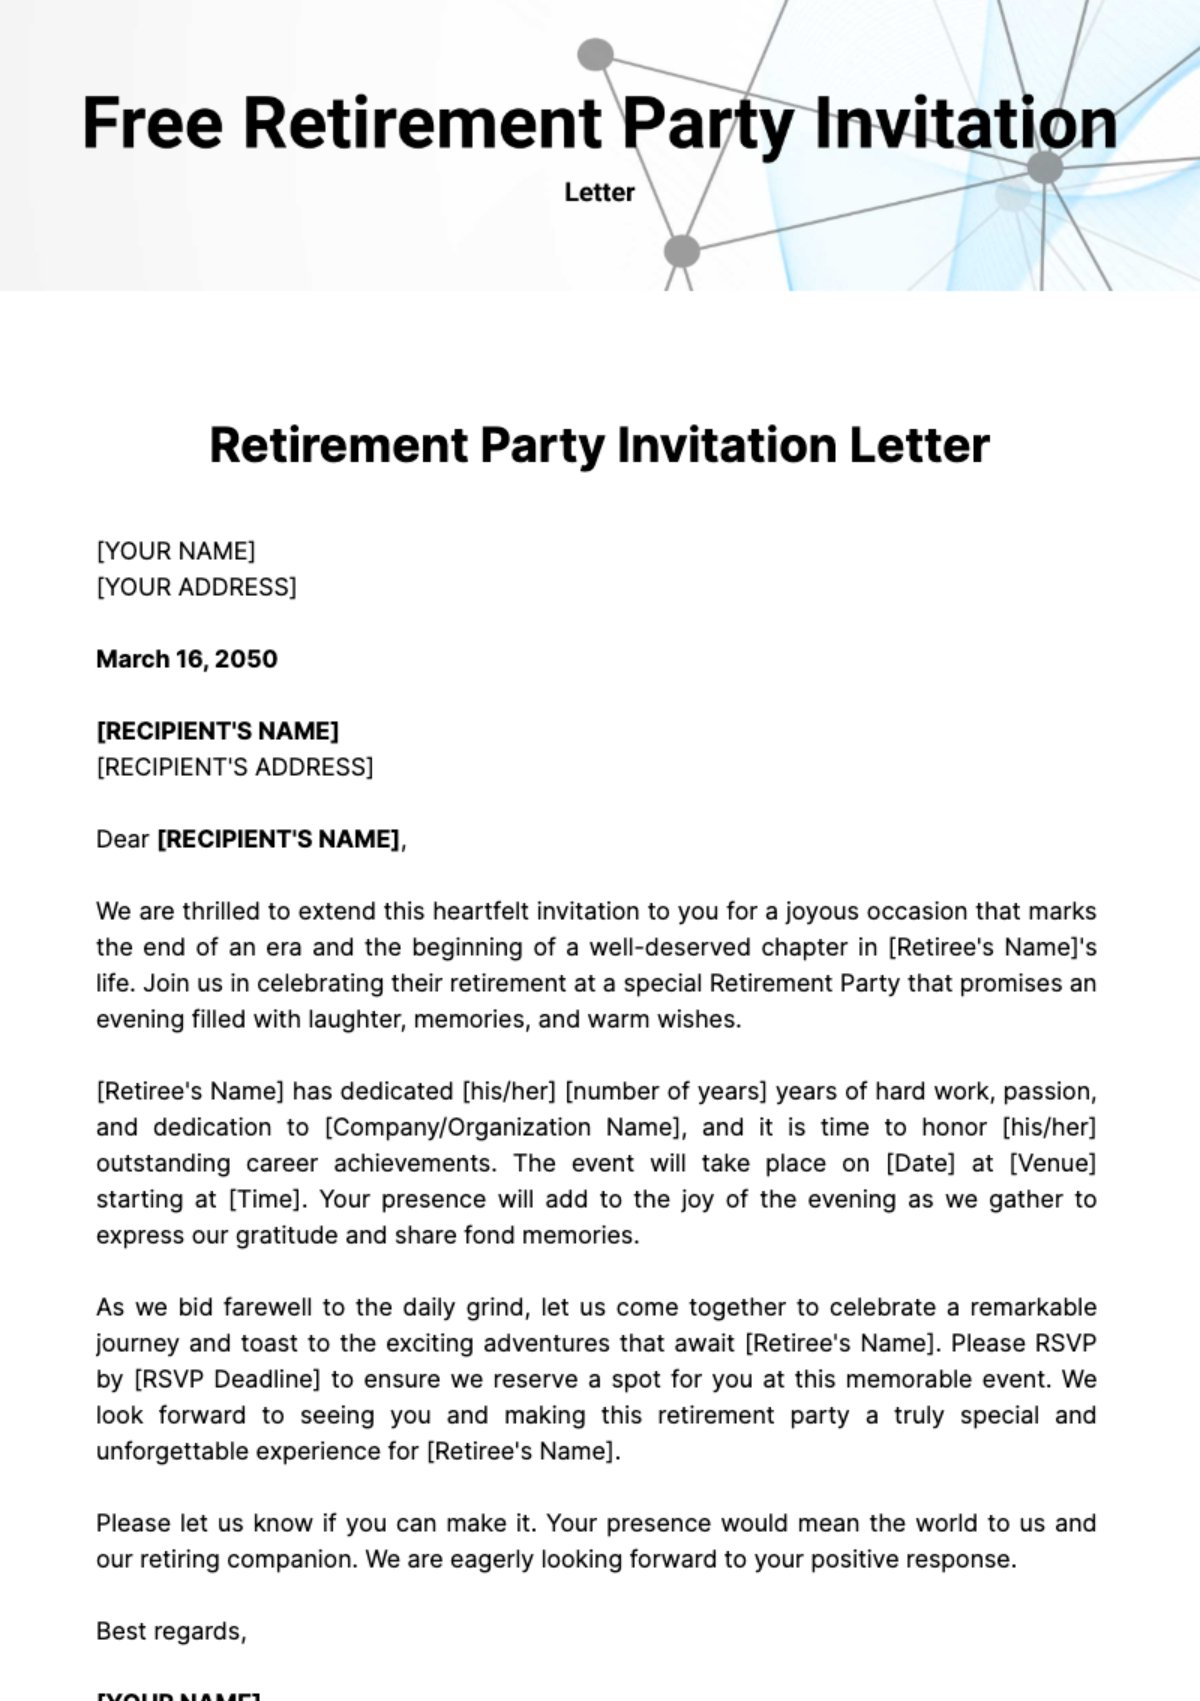 Free Retirement Party Invitation Letter Template